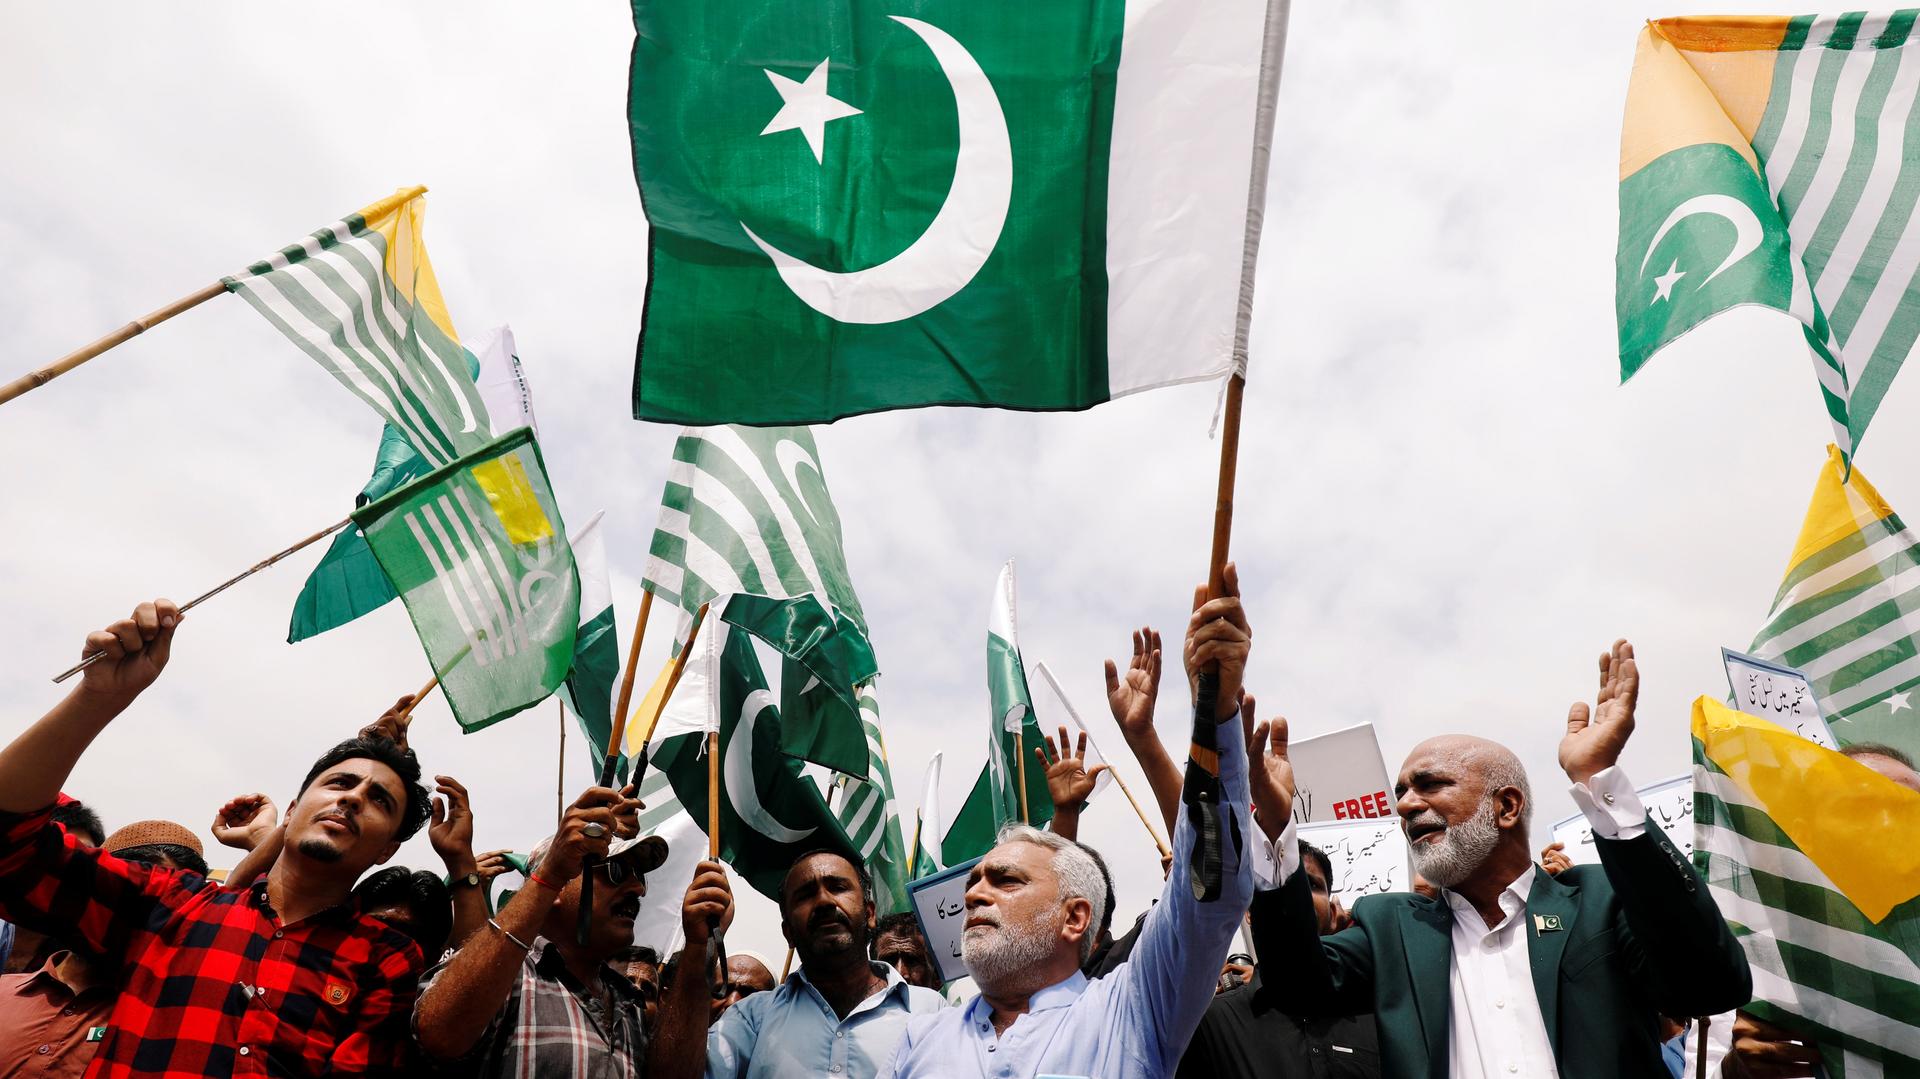 People carry Pakistan's and Azad Kashmir's green flags and chant slogans to express solidarity with the people of Kashmir, in Karachi, Pakistan, August 30, 2019.